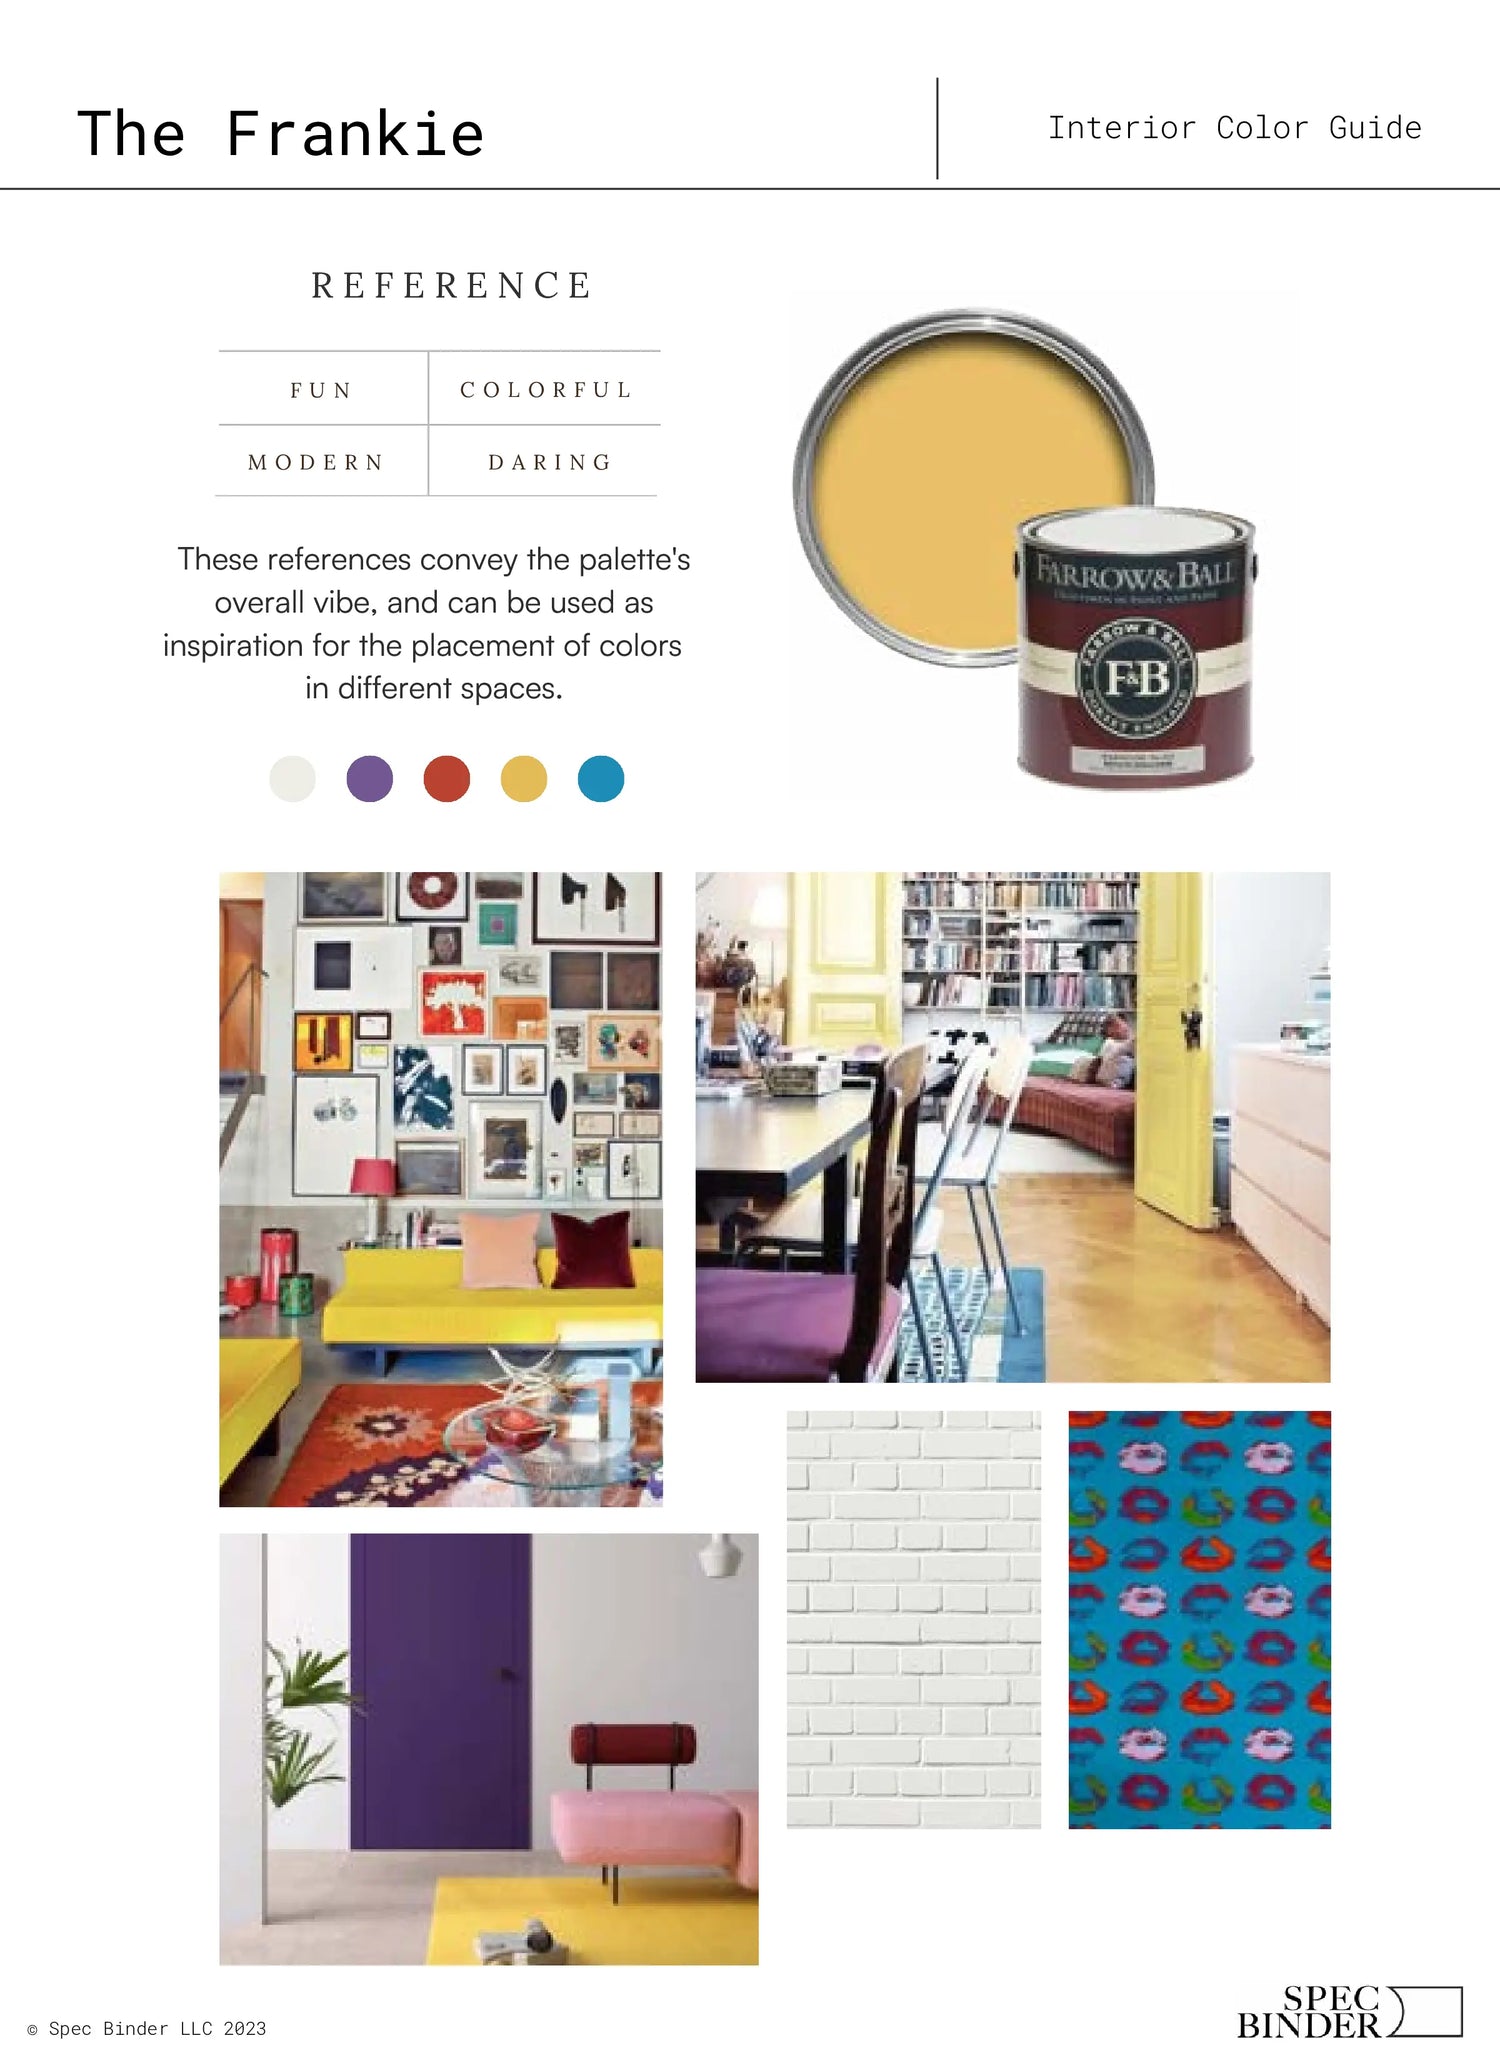 See photos of The Frankie paint colors in different spaces.The Frankie Color Palette reference images, paint samples, color swatches, and design elements. The Frankie color guide is Fun, Colorful, Modern, and Daring. The Frankie 